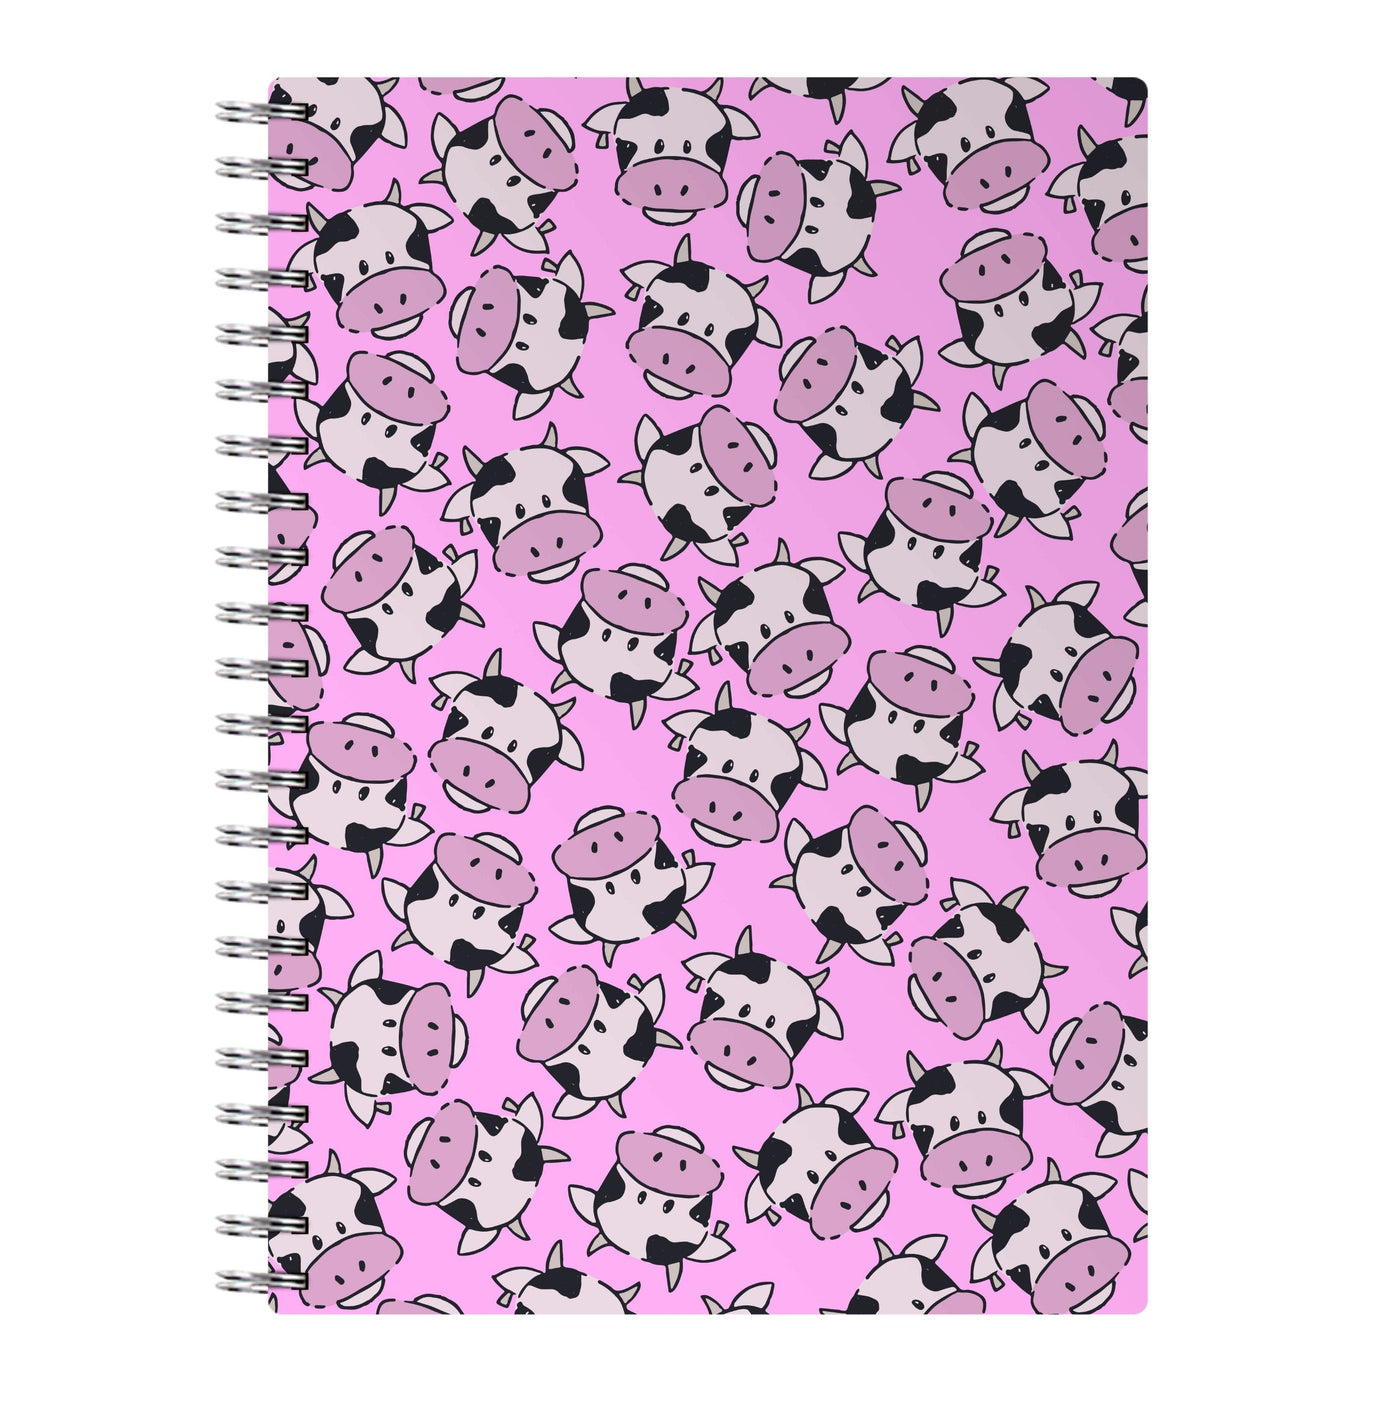 Cows - Animal Patterns Notebook